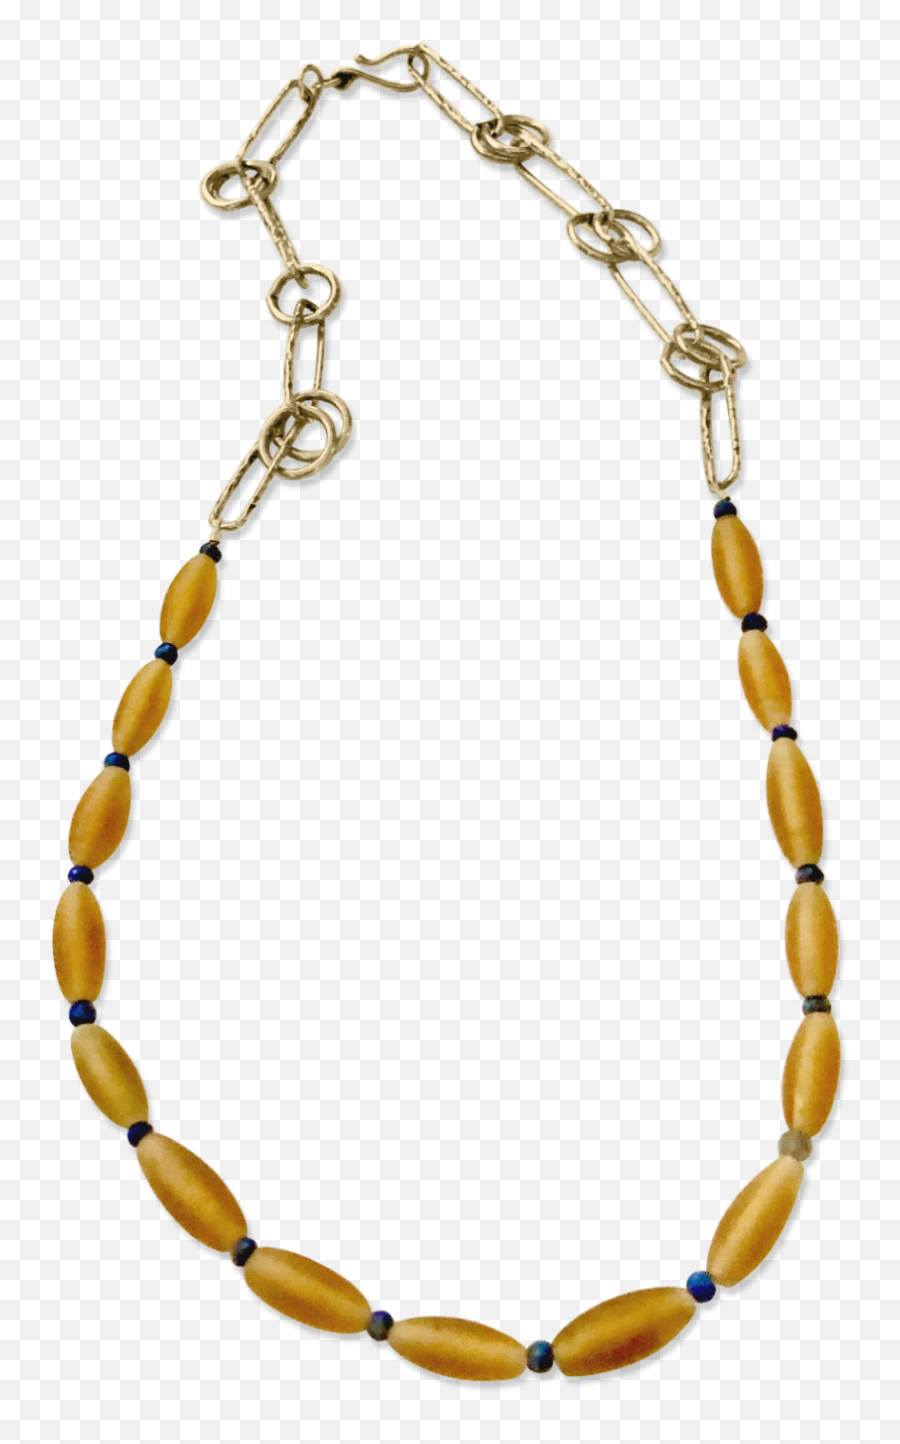 Golden Honey African Bead Necklace Emoji,How To Make An Image Transparent In Pixlr